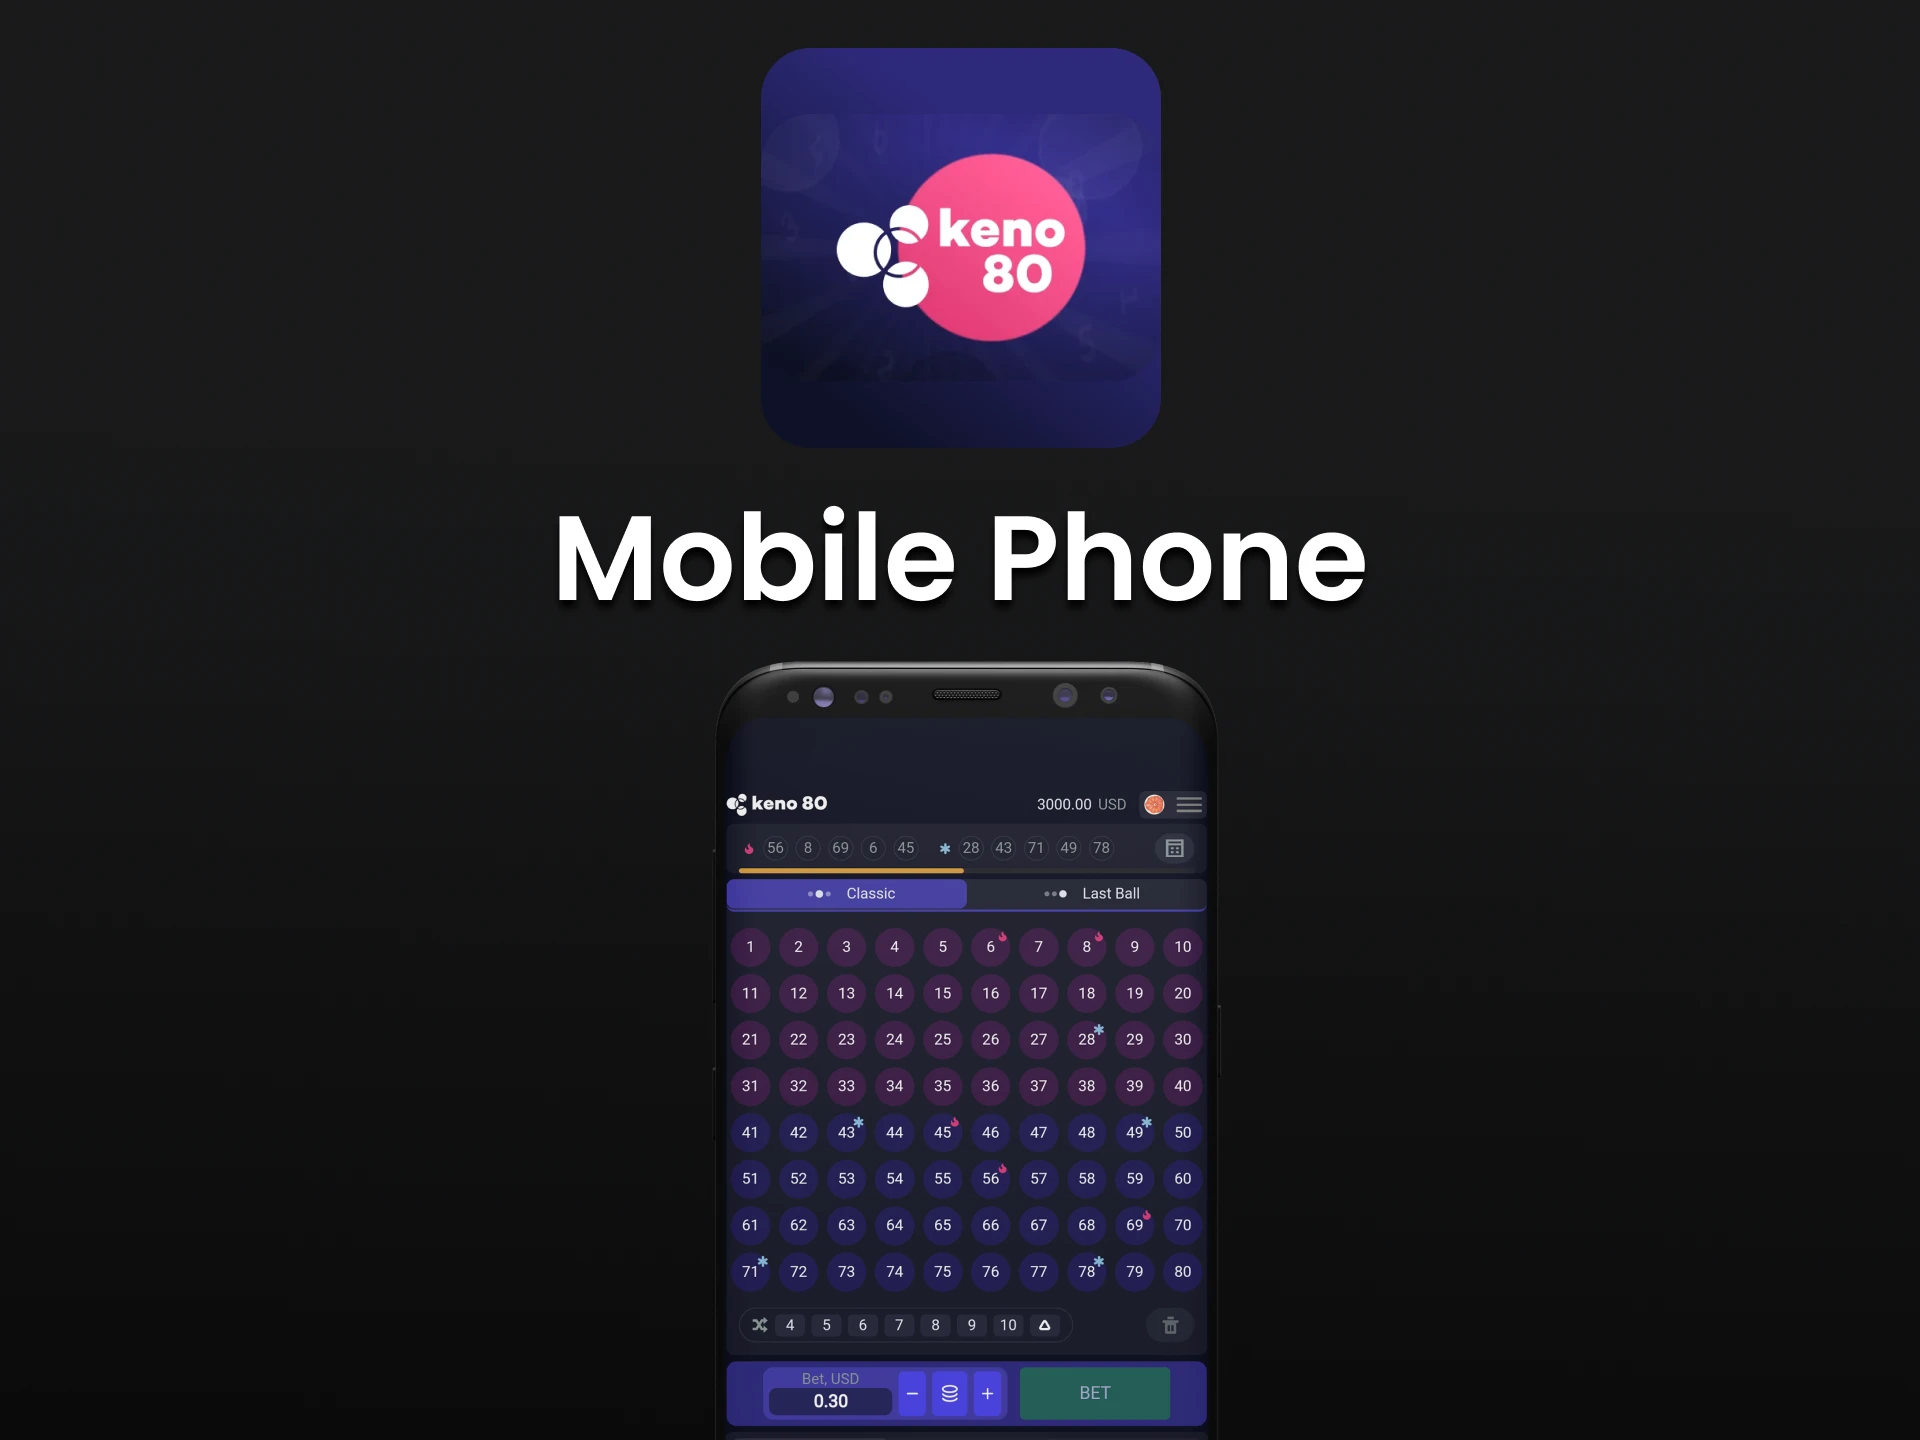 Download the Keno 80 app to play on your phone.